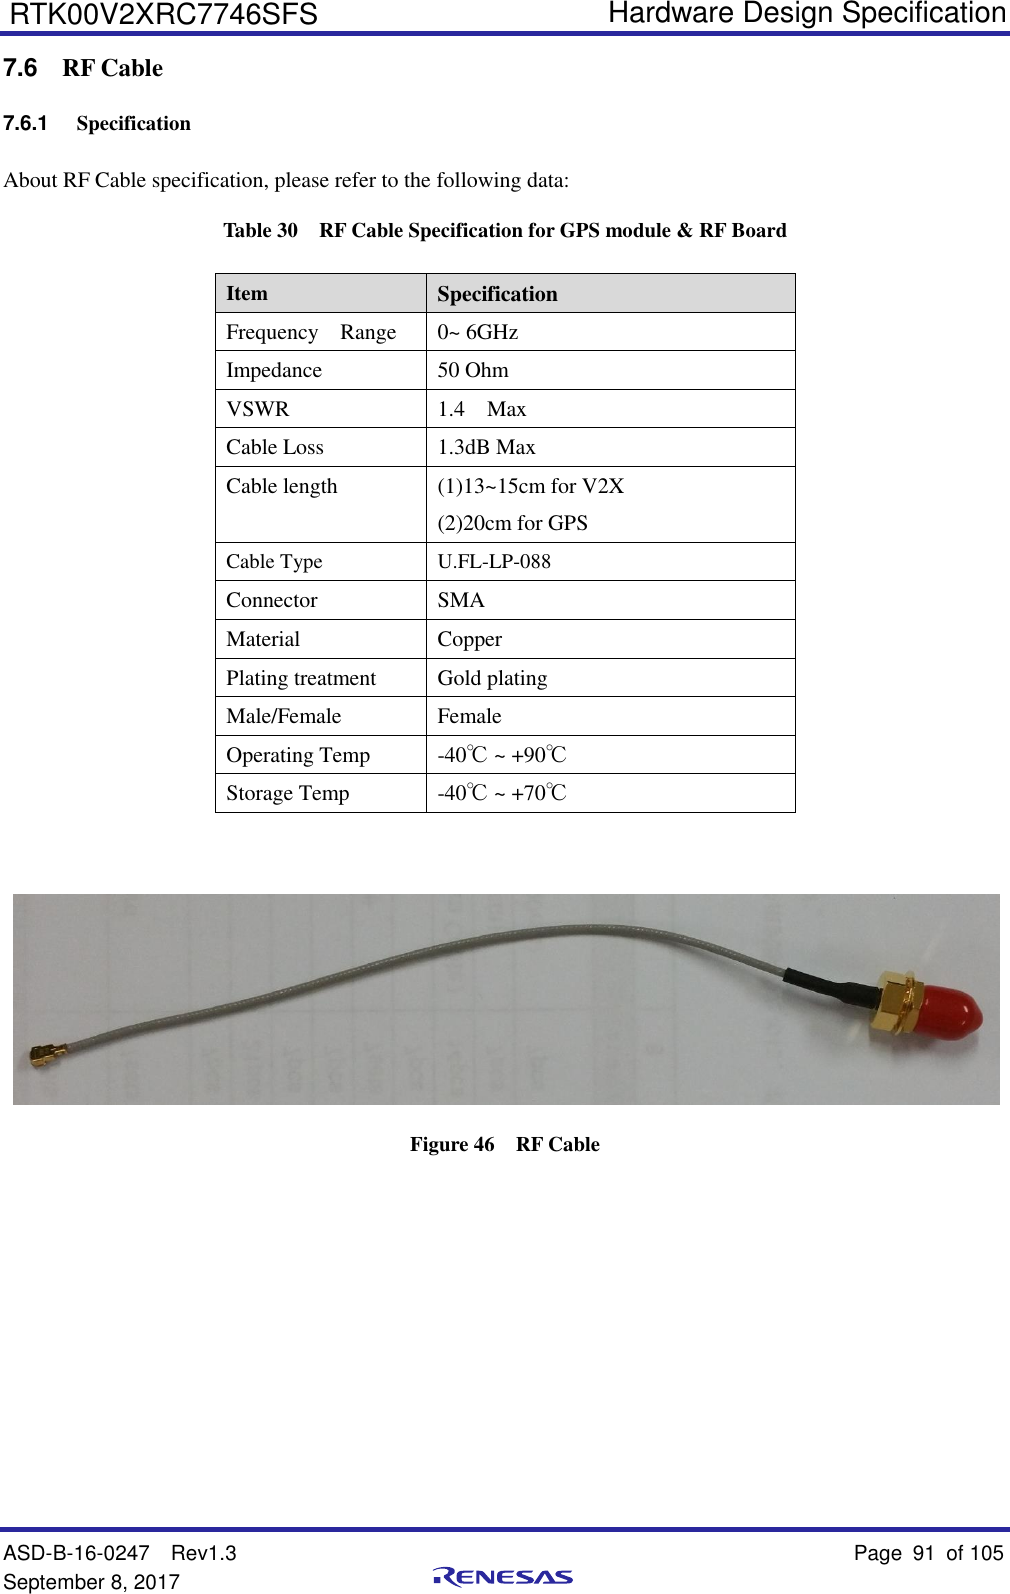   Hardware Design Specification ASD-B-16-0247  Rev1.3    Page 91  of 105 September 8, 2017      RTK00V2XRC7746SFS 7.6  RF Cable 7.6.1 Specification About RF Cable specification, please refer to the following data: Table 30  RF Cable Specification for GPS module &amp; RF Board Item Specification Frequency Range 0~ 6GHz Impedance 50 Ohm VSWR 1.4    Max Cable Loss 1.3dB Max Cable length (1)13~15cm for V2X (2)20cm for GPS Cable Type U.FL-LP-088 Connector SMA   Material Copper Plating treatment Gold plating Male/Female Female Operating Temp -40℃ ~ +90℃ Storage Temp -40℃ ~ +70℃    Figure 46  RF Cable         